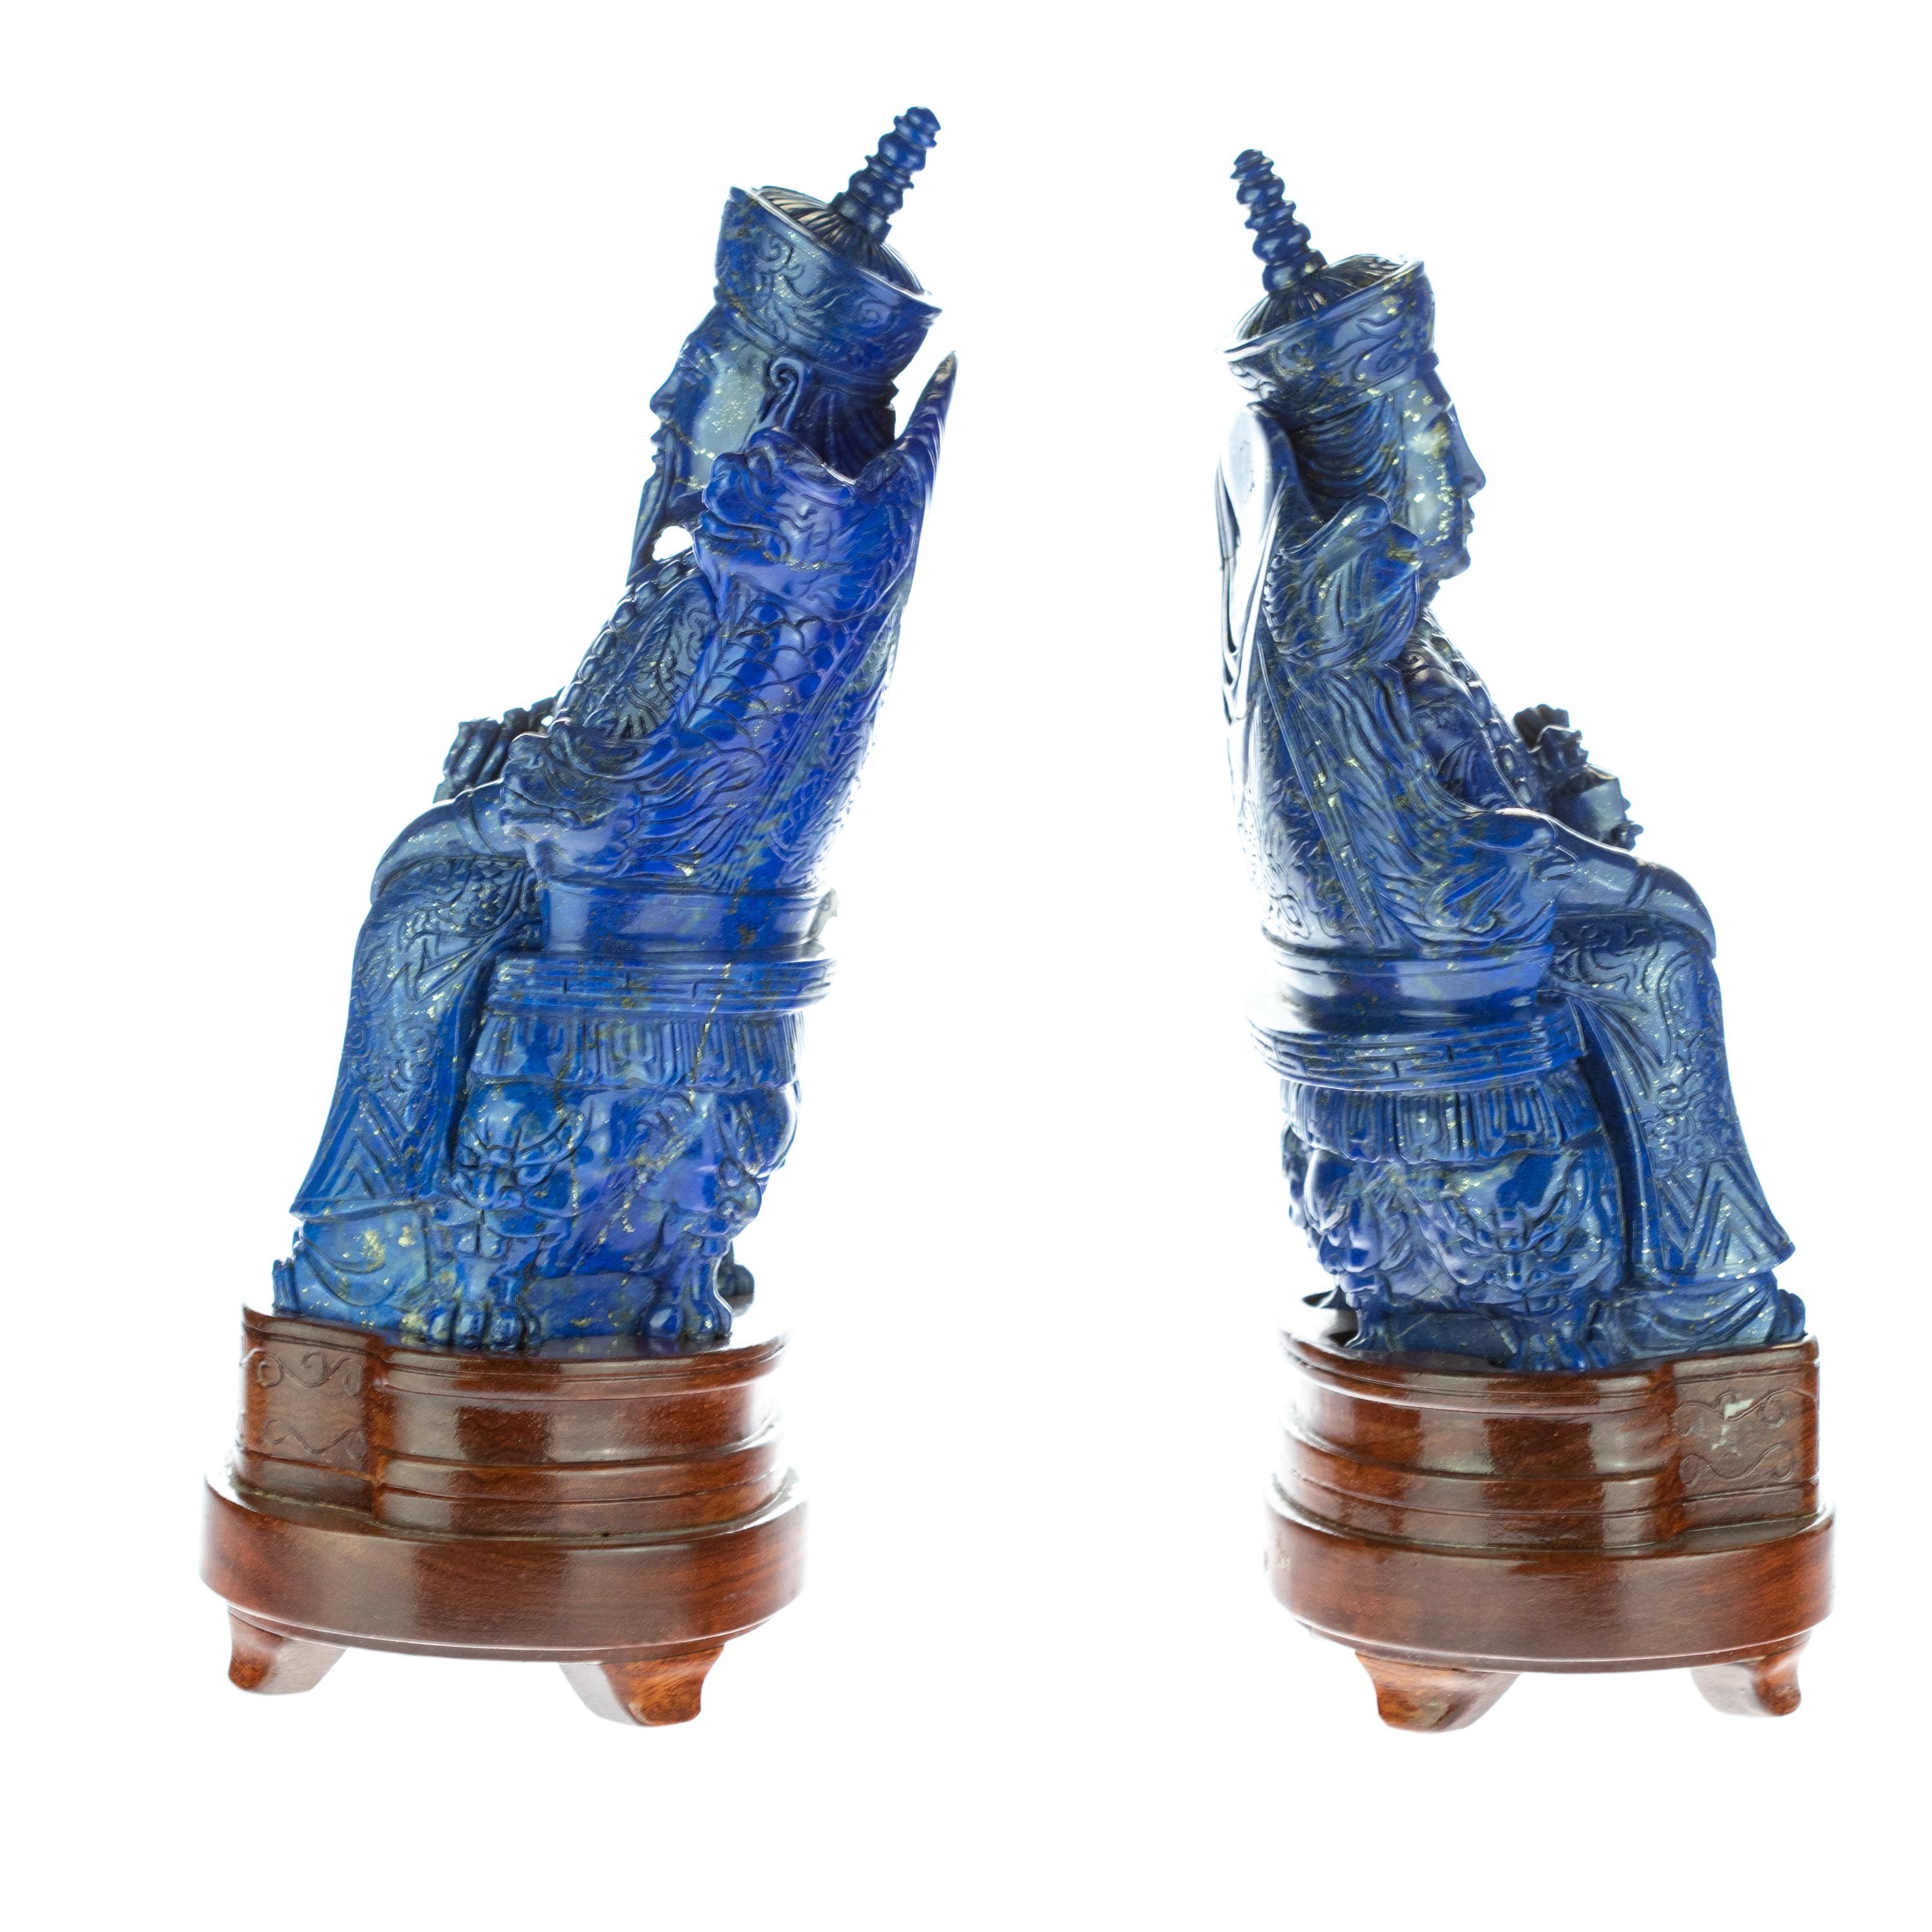 Hand-Carved Lapis Lazuli King Queen Carved Blue Gemstone Artisanal Royalty Statue Sculpture For Sale